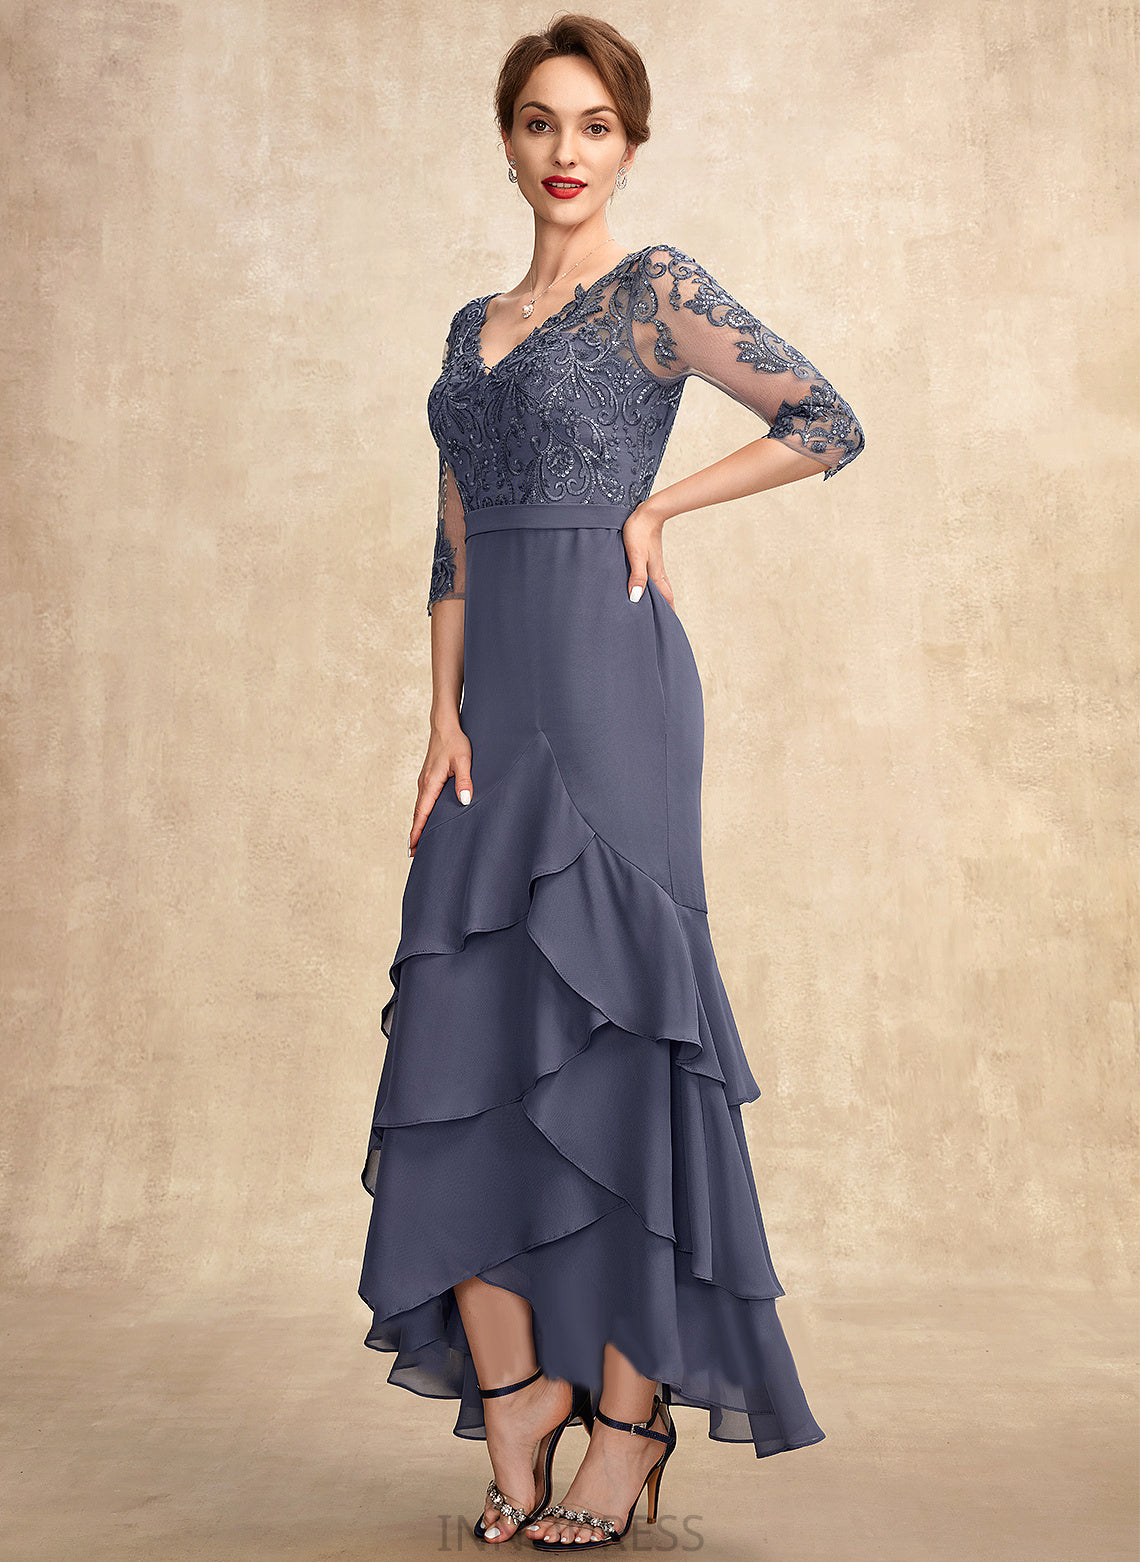 Dress Ruffles Cascading Mother of the Bride Dresses Sequins With Asymmetrical Bride Chiffon of Trumpet/Mermaid Anika the Mother Lace V-neck